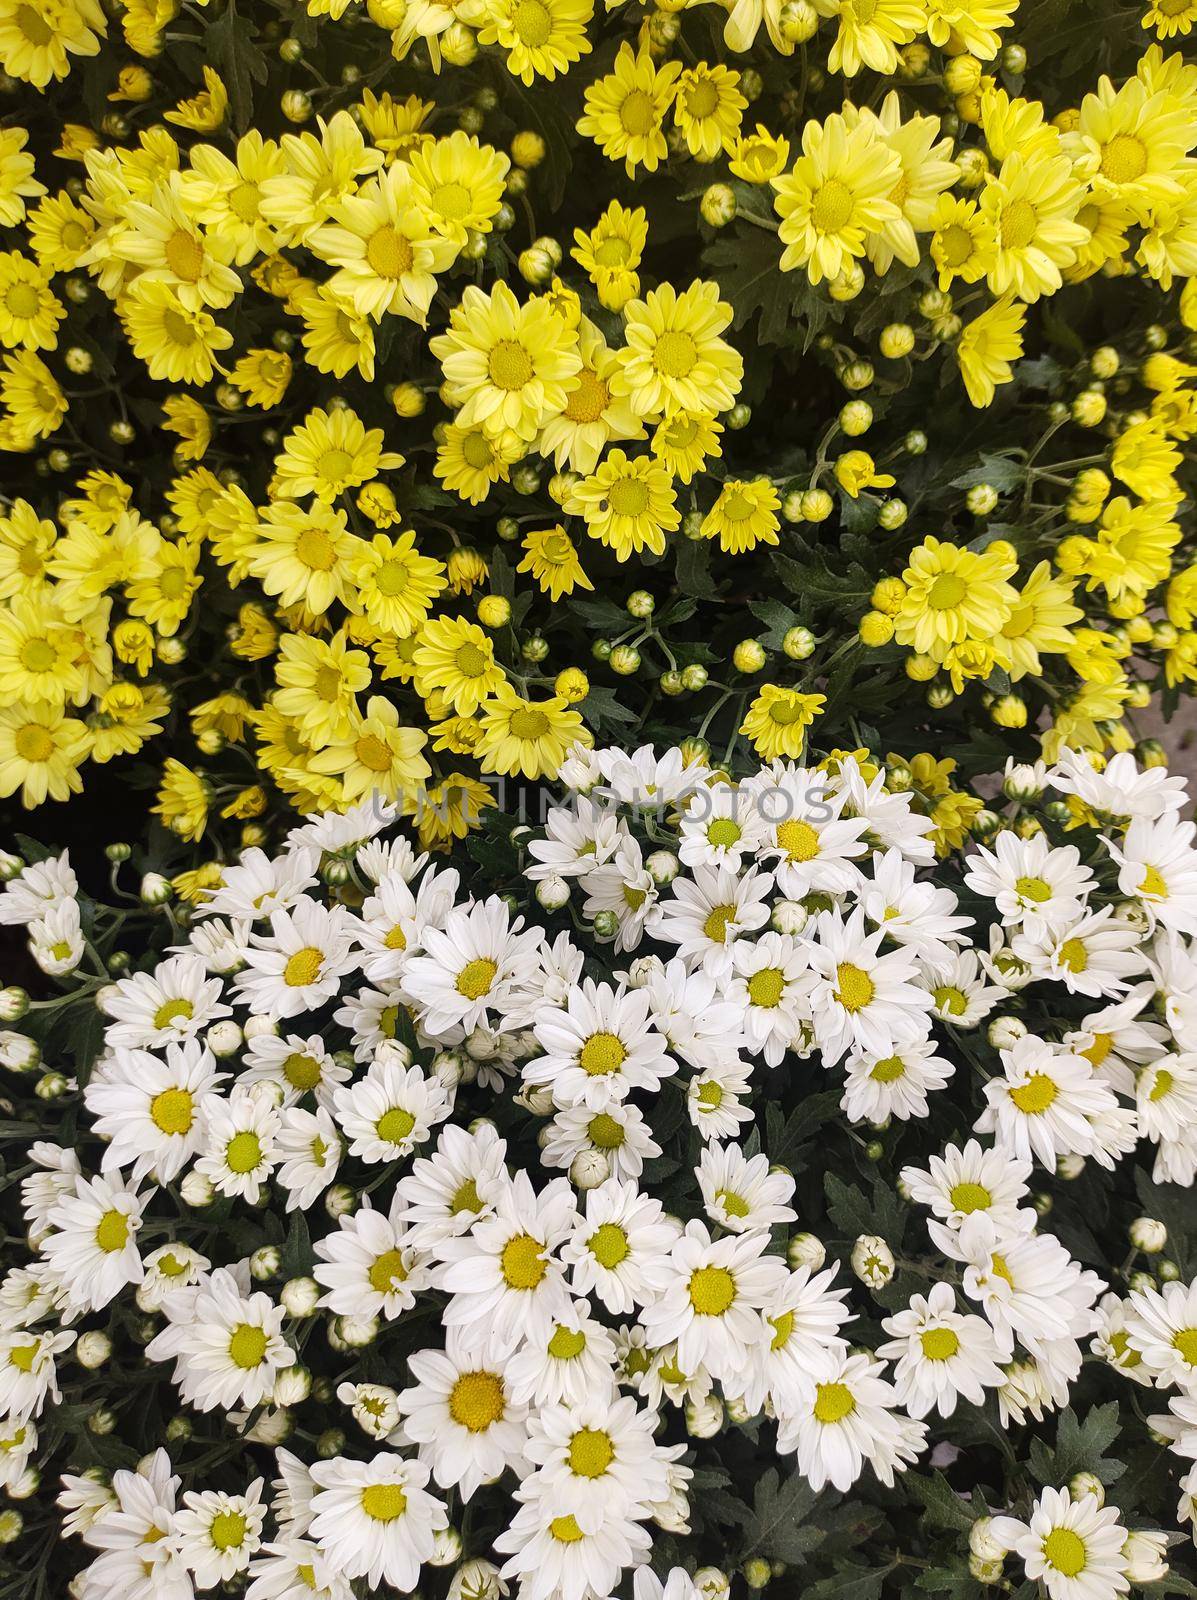 Flower bed with yellow and white chrysanthemums half and half. by silviopl